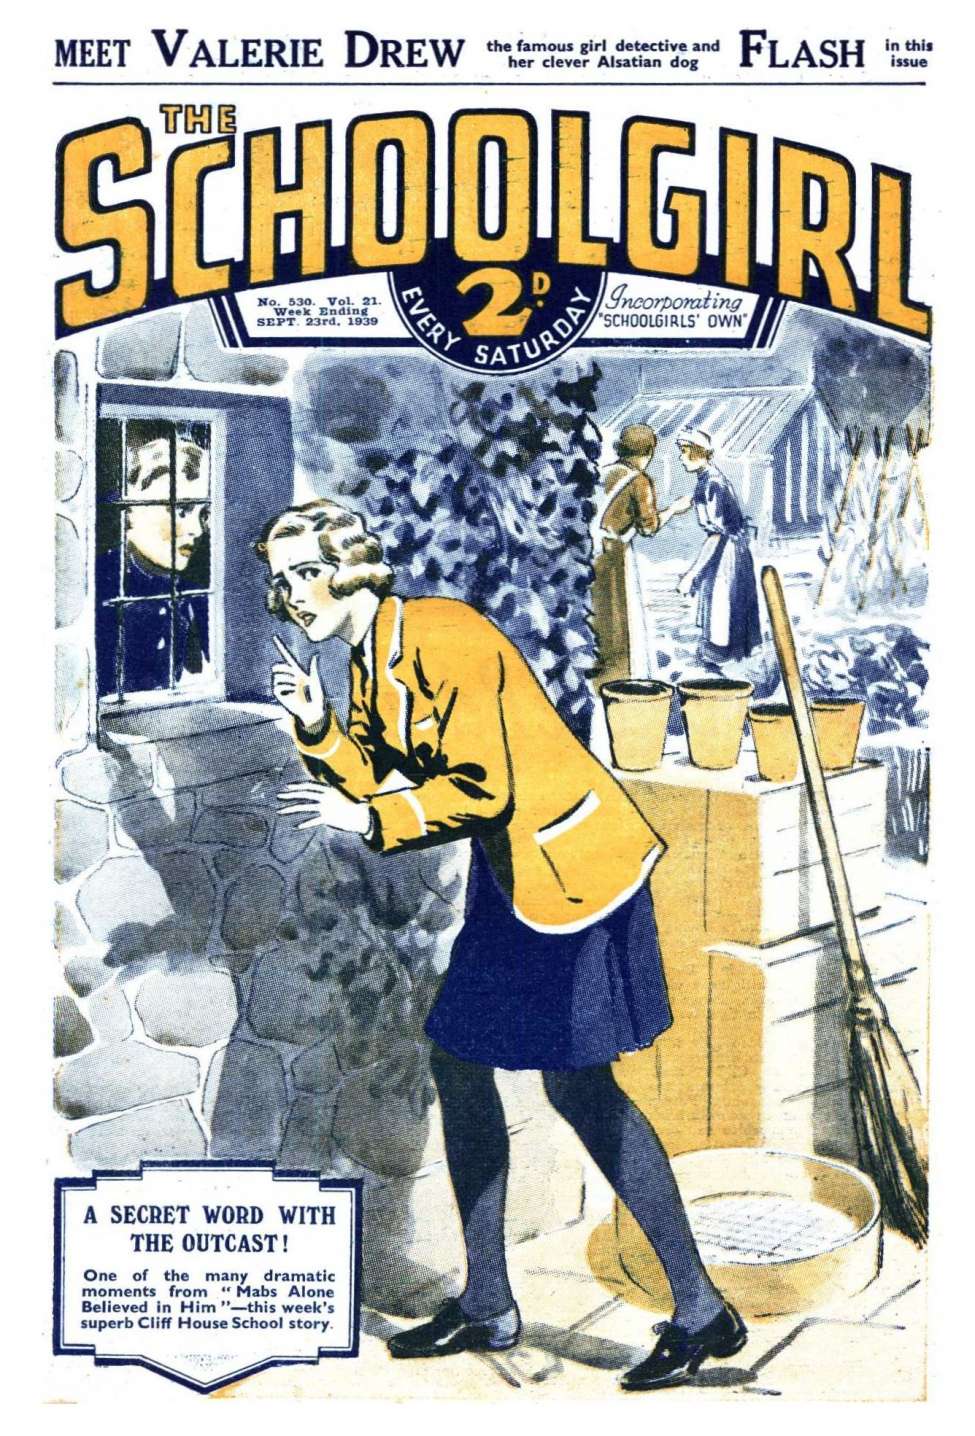 Book Cover For The Schoolgirl 530